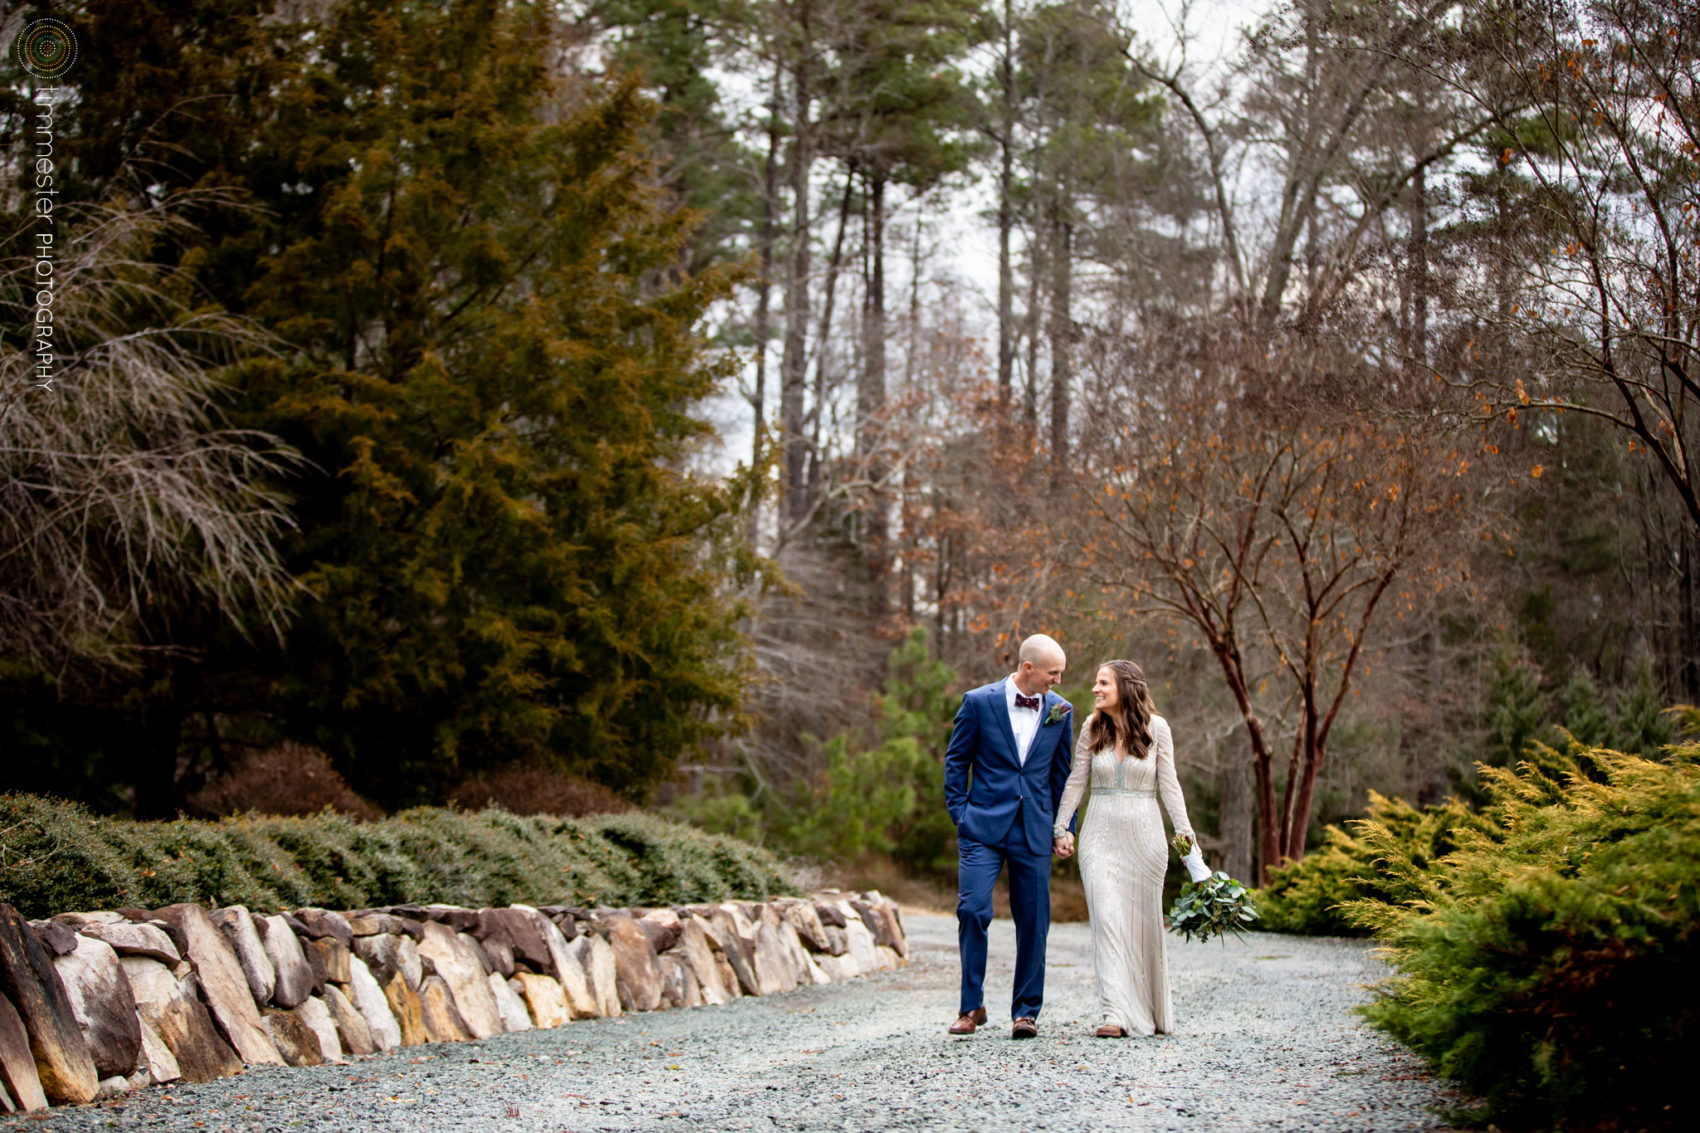 A gorgeous winter wedding at Chapel Hill Carriage House